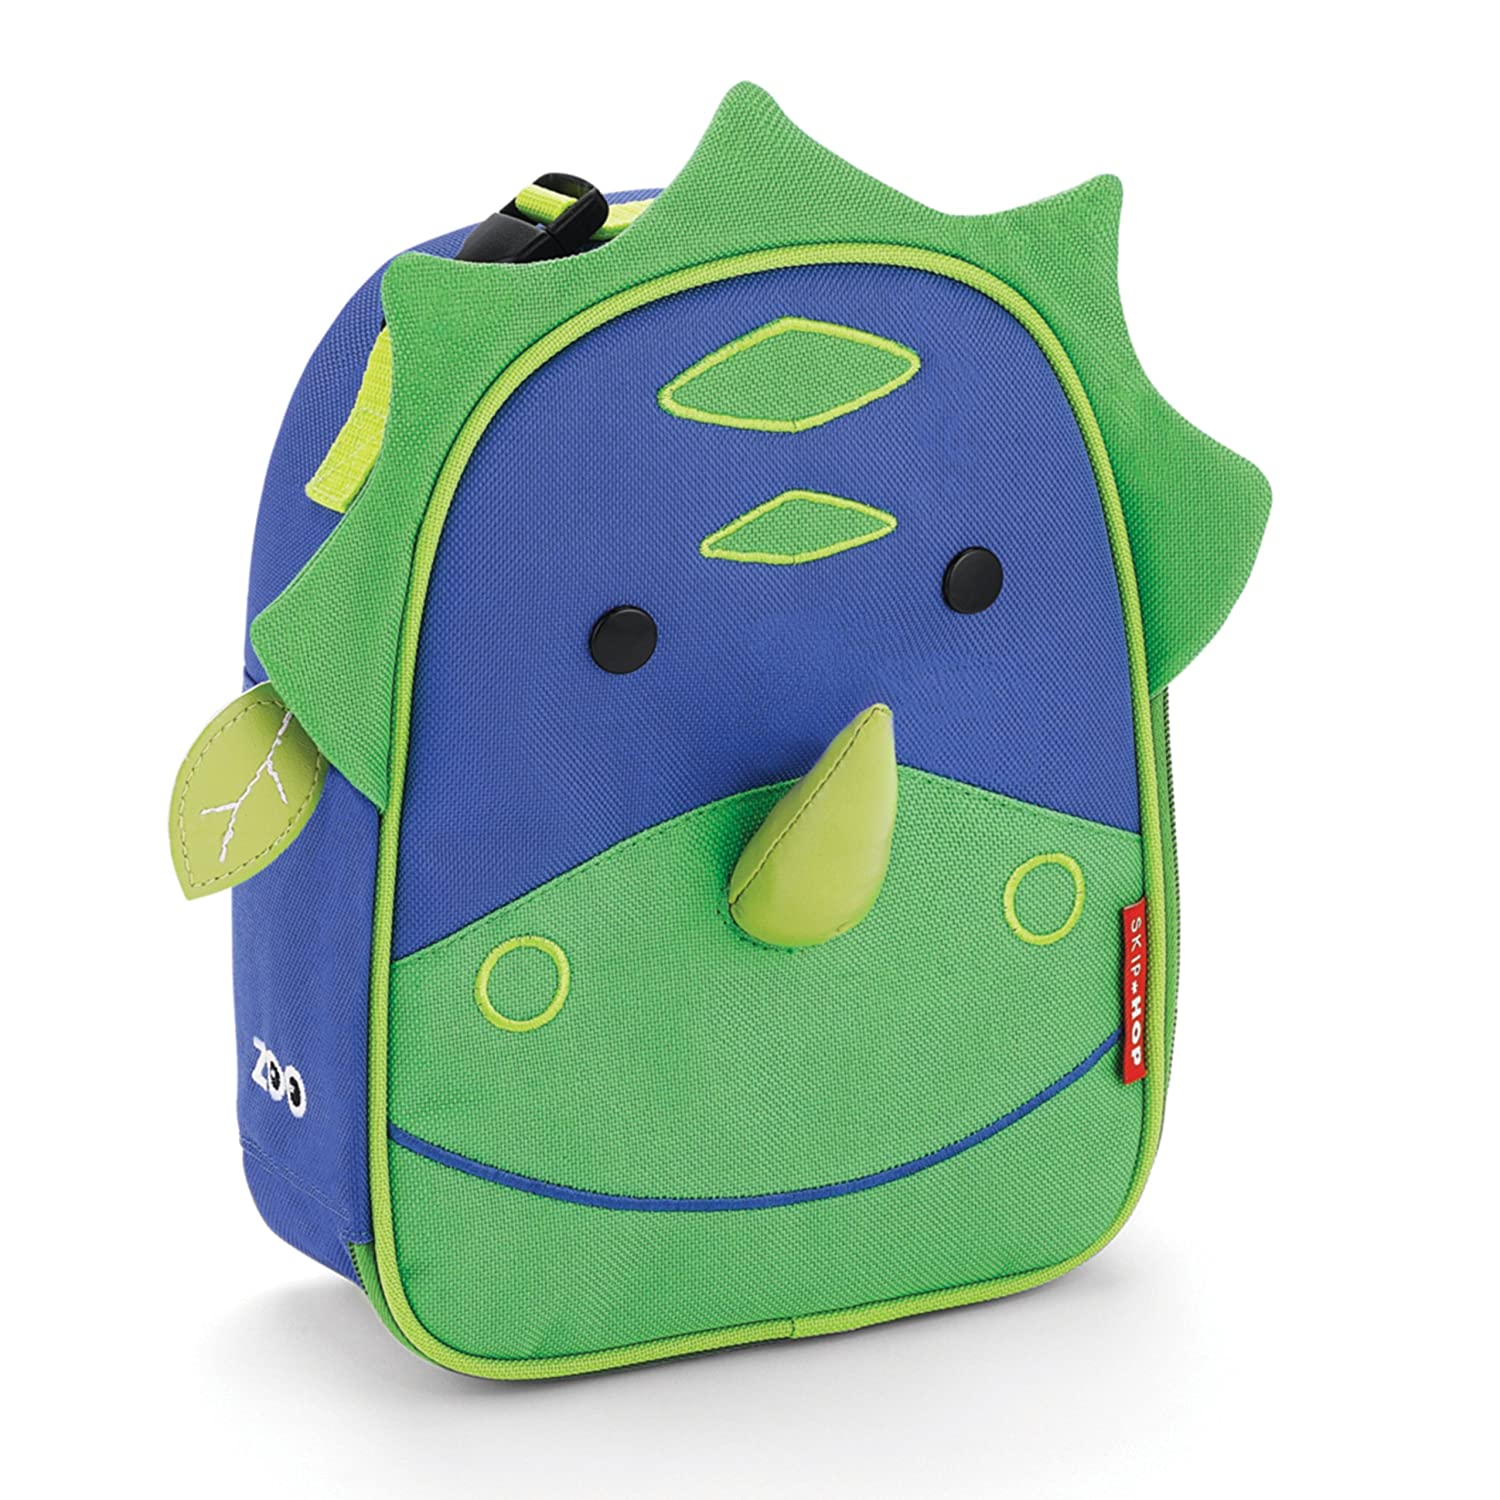 SKIP HOP Zoo Lunchie Insulated Kids Lunch Bag Dinosaur - ANB Baby -baby activity center